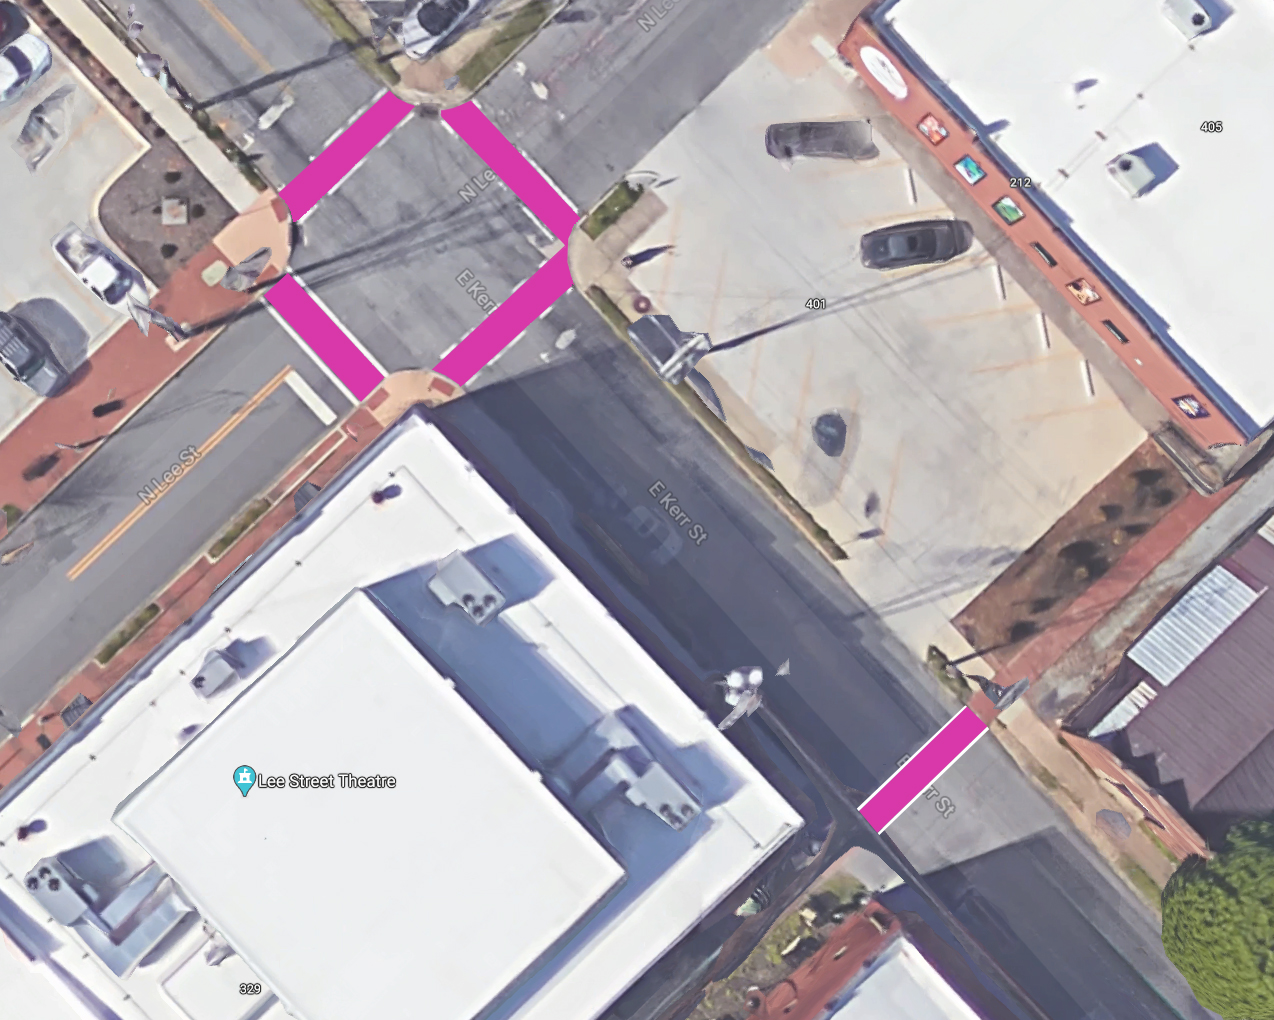 aerial map of the 5 crosswalk locations